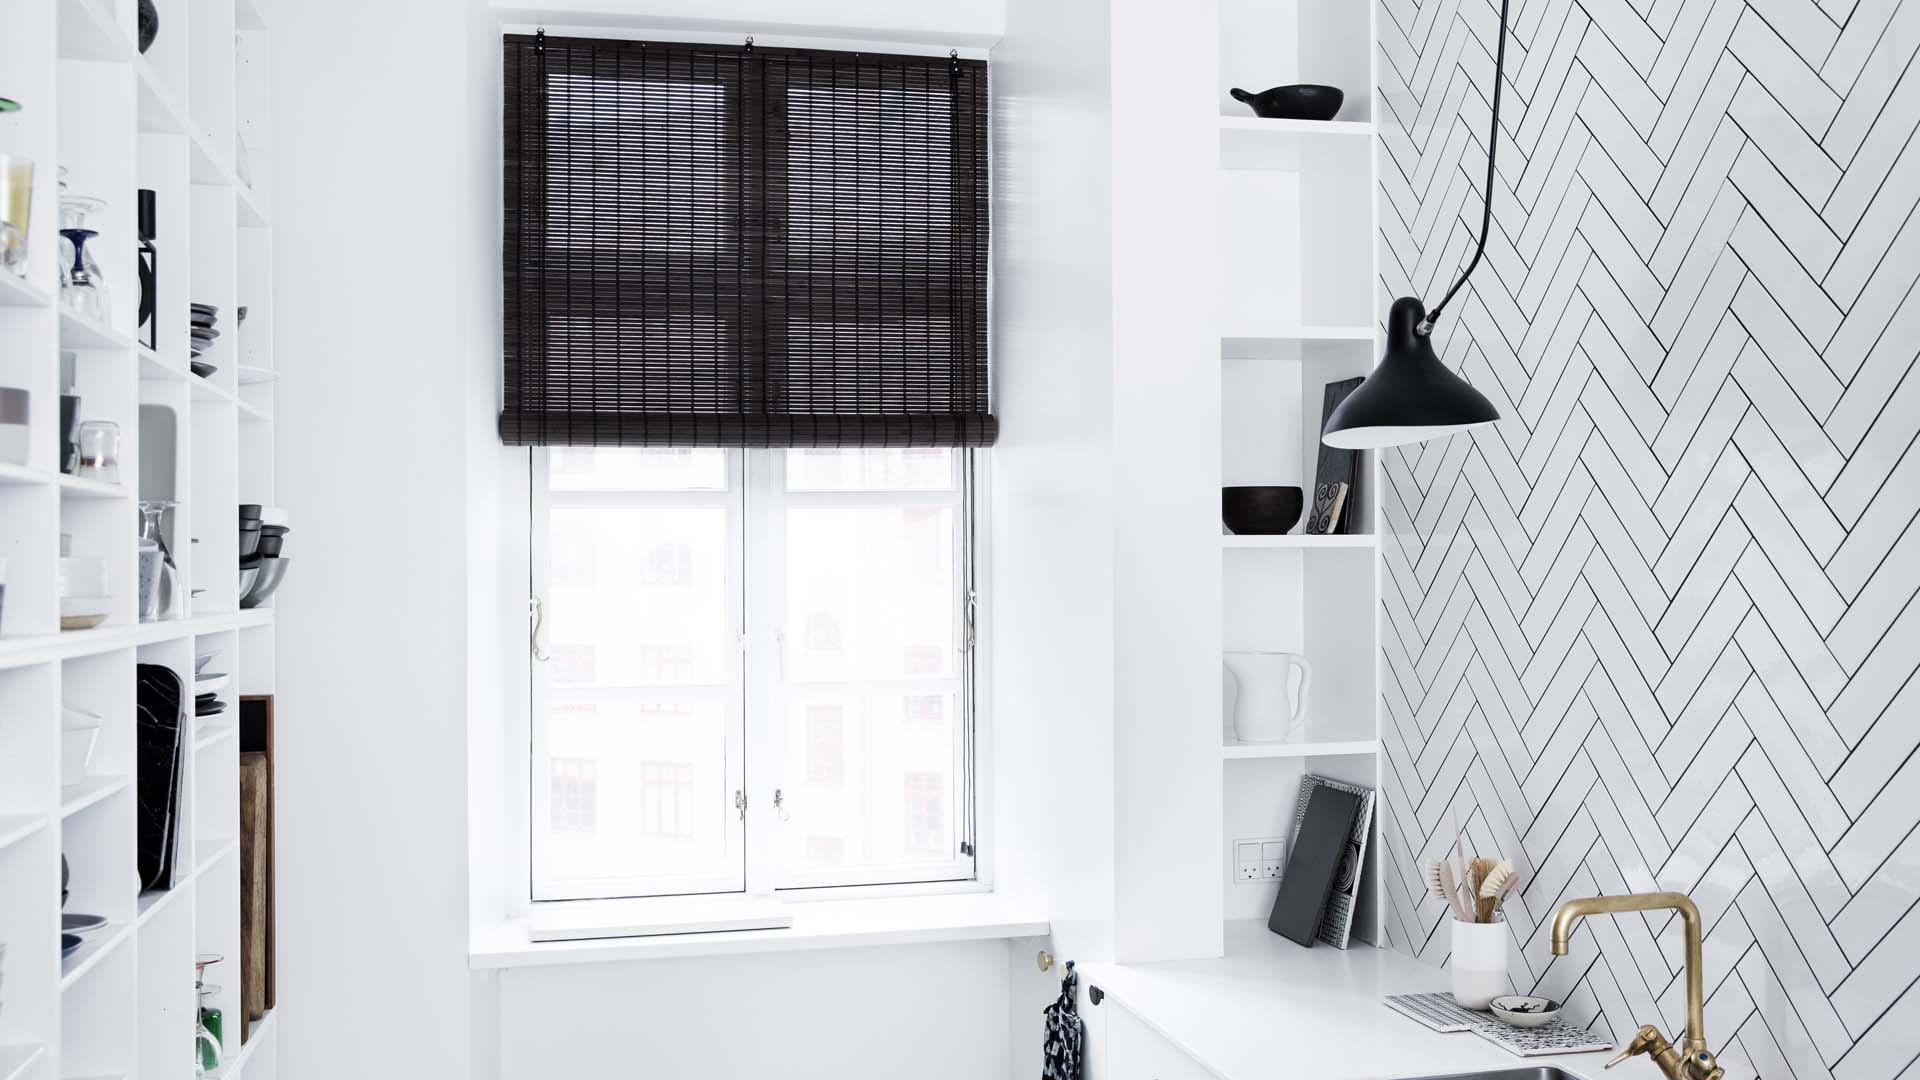 A small kitchen with a statement wall of geometric grey tiles and a window with a black blind